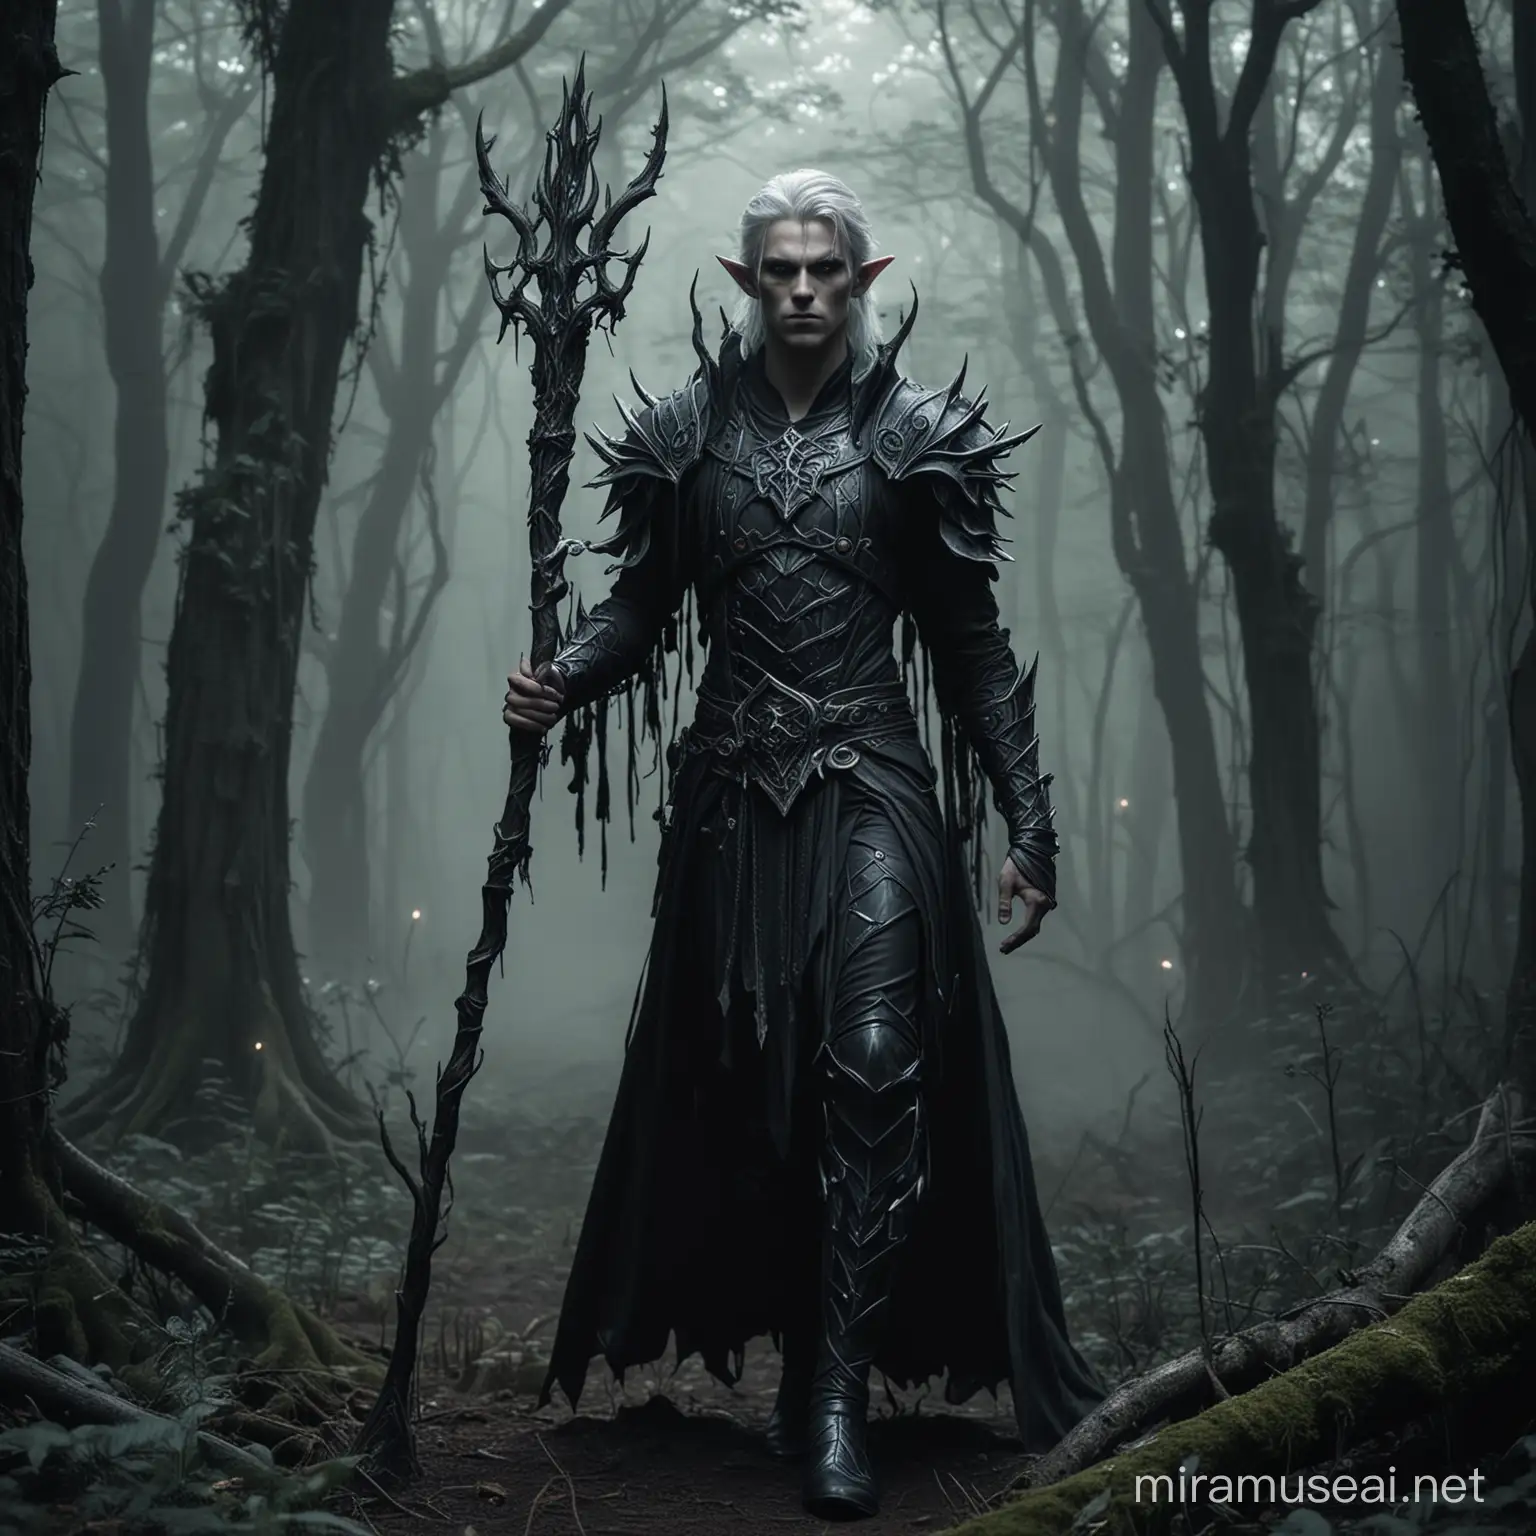 Ethereal handsome Male Elf Banshee, With Unholy Necromancer Staff and Outfit, Standing in a Dark Forest